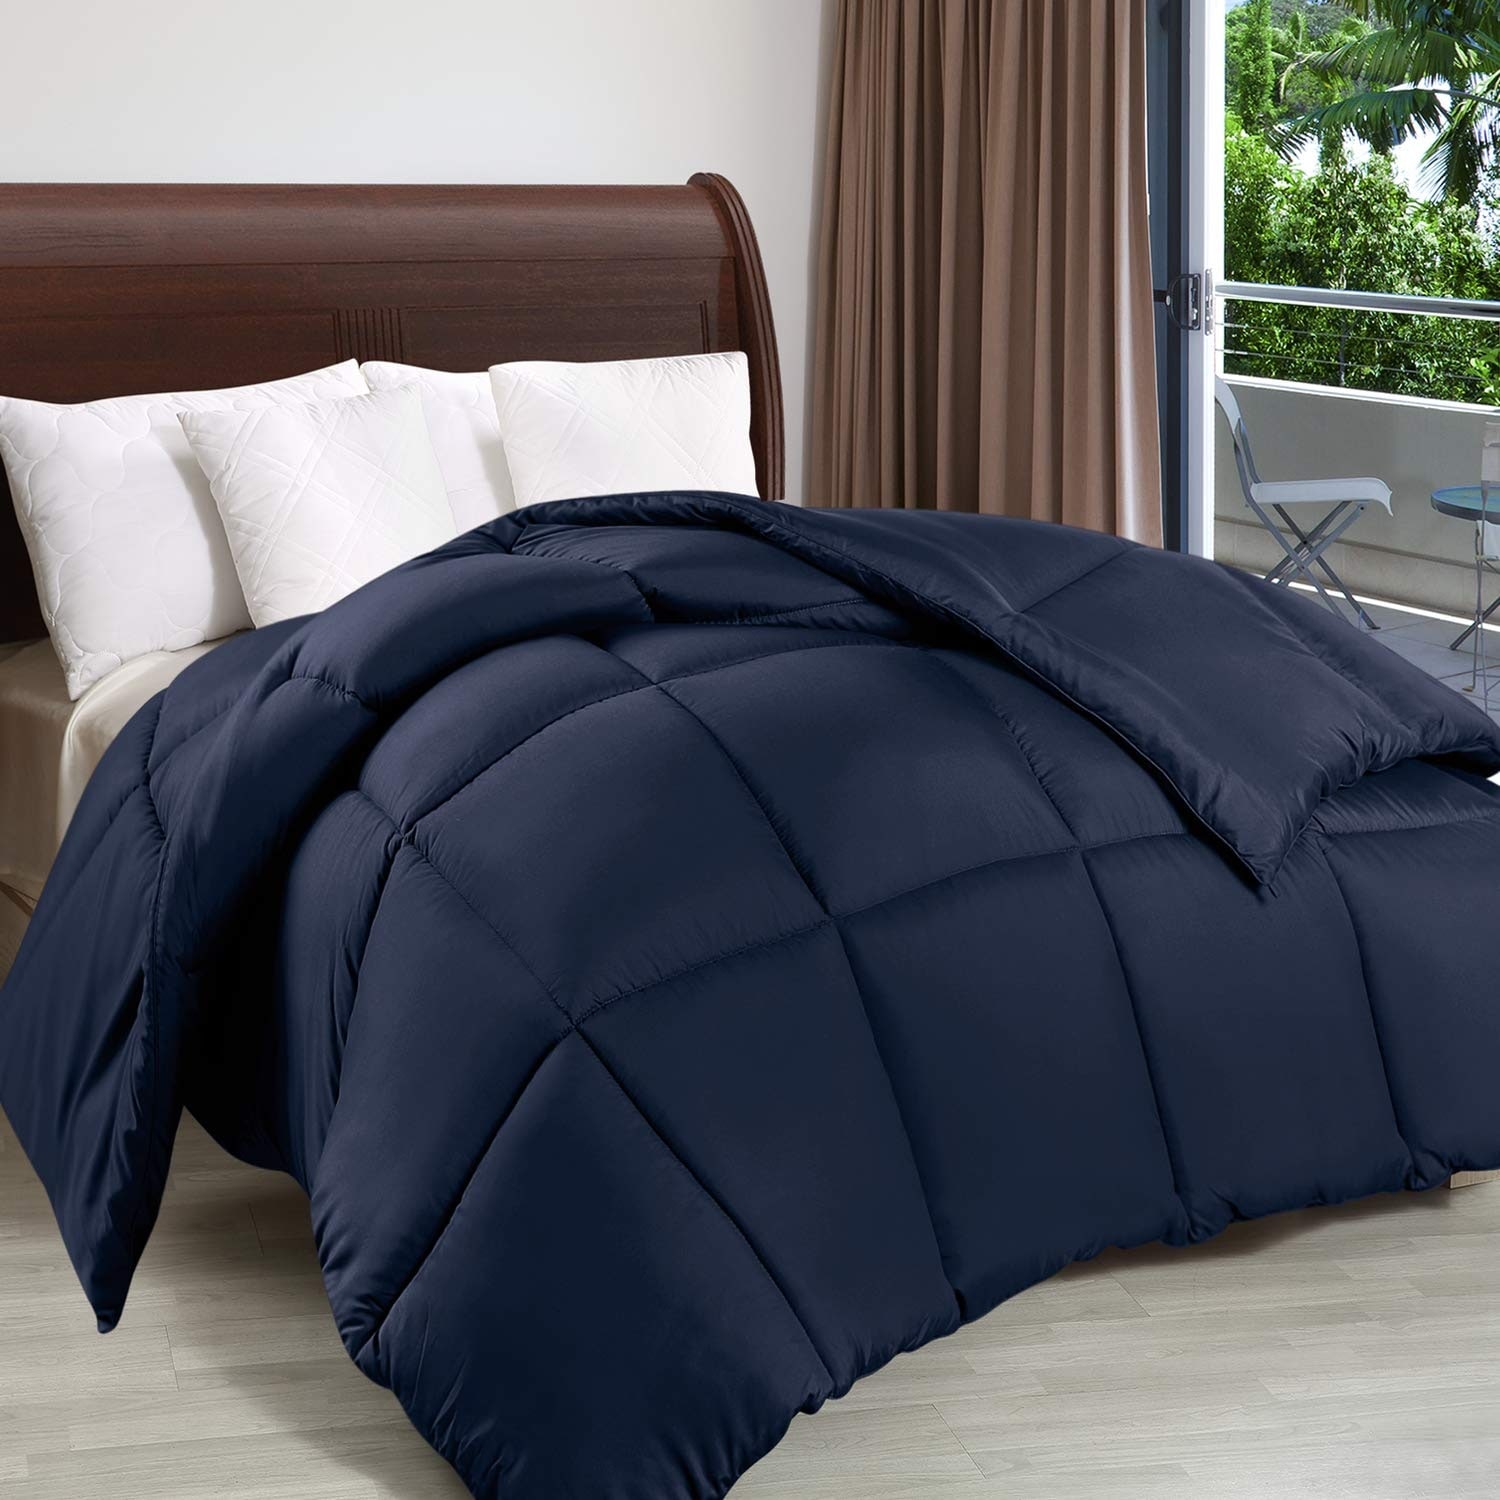 https://ak1.ostkcdn.com/images/products/is/images/direct/a421c3c7169aa7f17bc7b8266fdbeb593b273254/Utopia-Bedding-Comforter-Duvet-Insert-Quilted-Comforter-with-Corner-Tabs.jpg